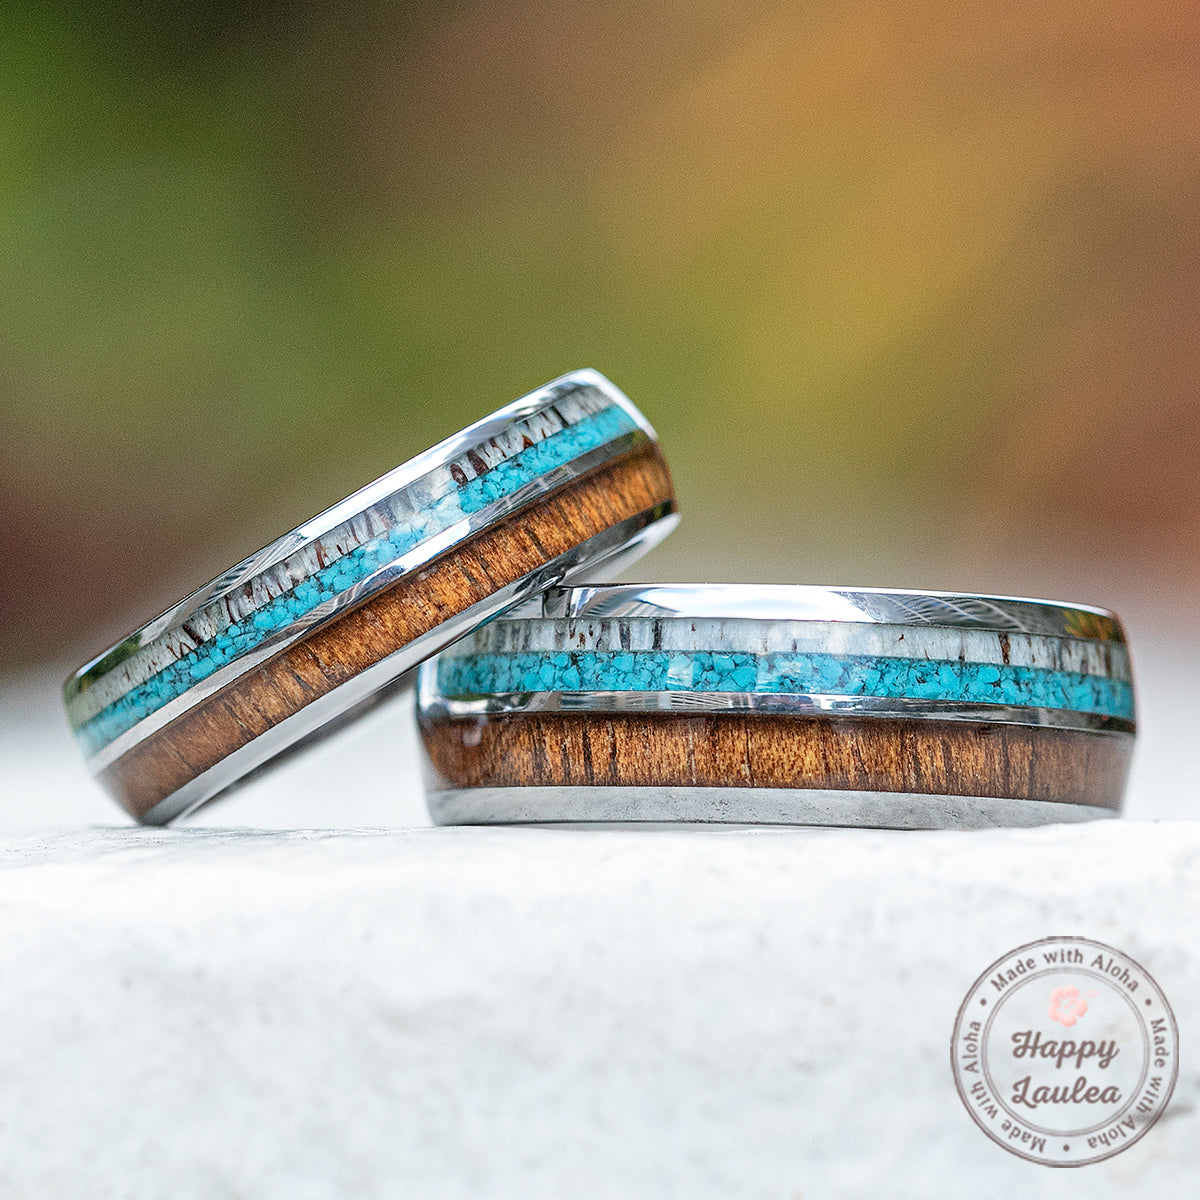 Pair of 6&8mm Tungsten Carbide Rings with Antler, Turquoise, & Hawaiian Koa Wood Inlay - Dome Shape, Comfort Fitment